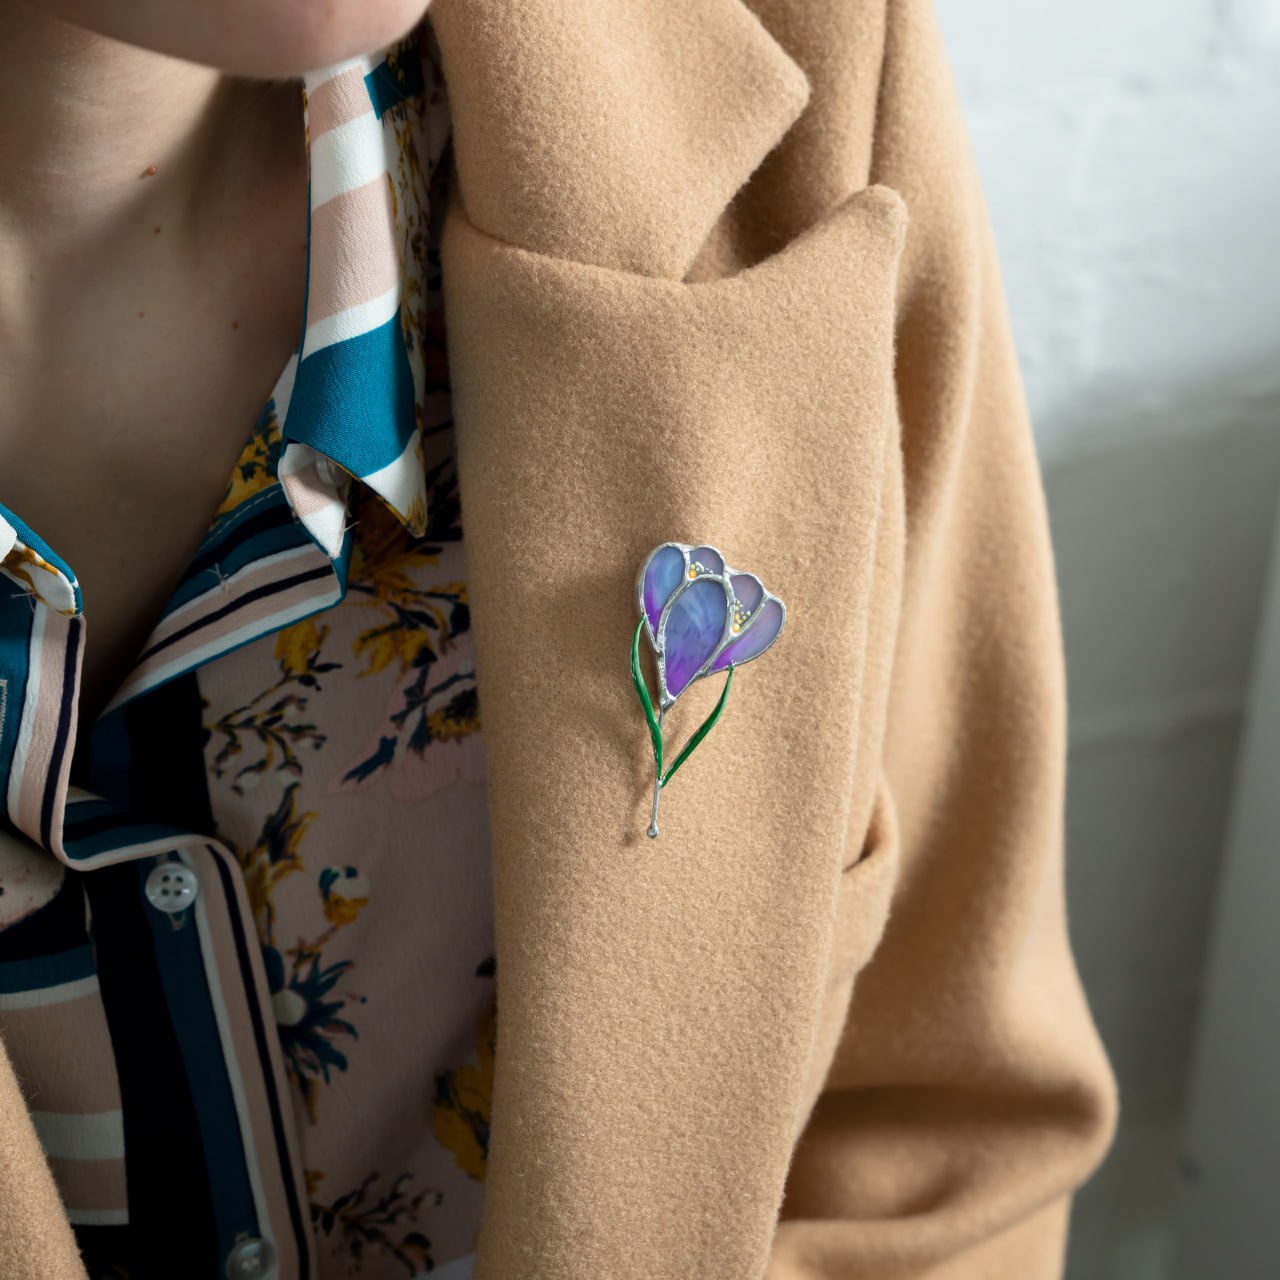 Purplish crocus flower brooch of stained glass in a camel coat